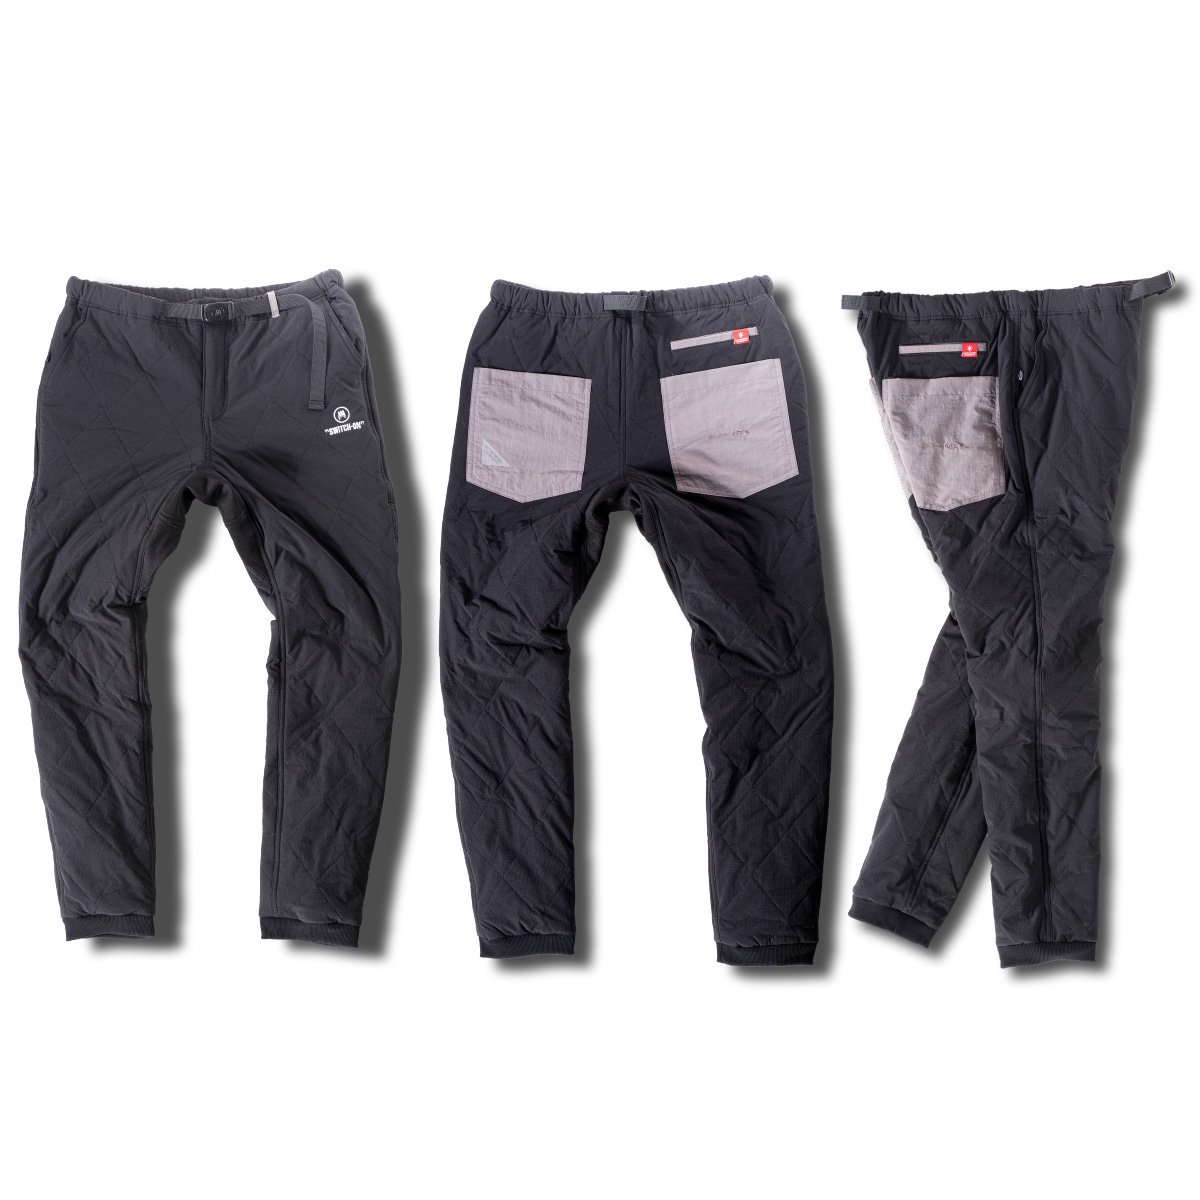 <img class='new_mark_img1' src='https://img.shop-pro.jp/img/new/icons15.gif' style='border:none;display:inline;margin:0px;padding:0px;width:auto;' />EZ quilt pants